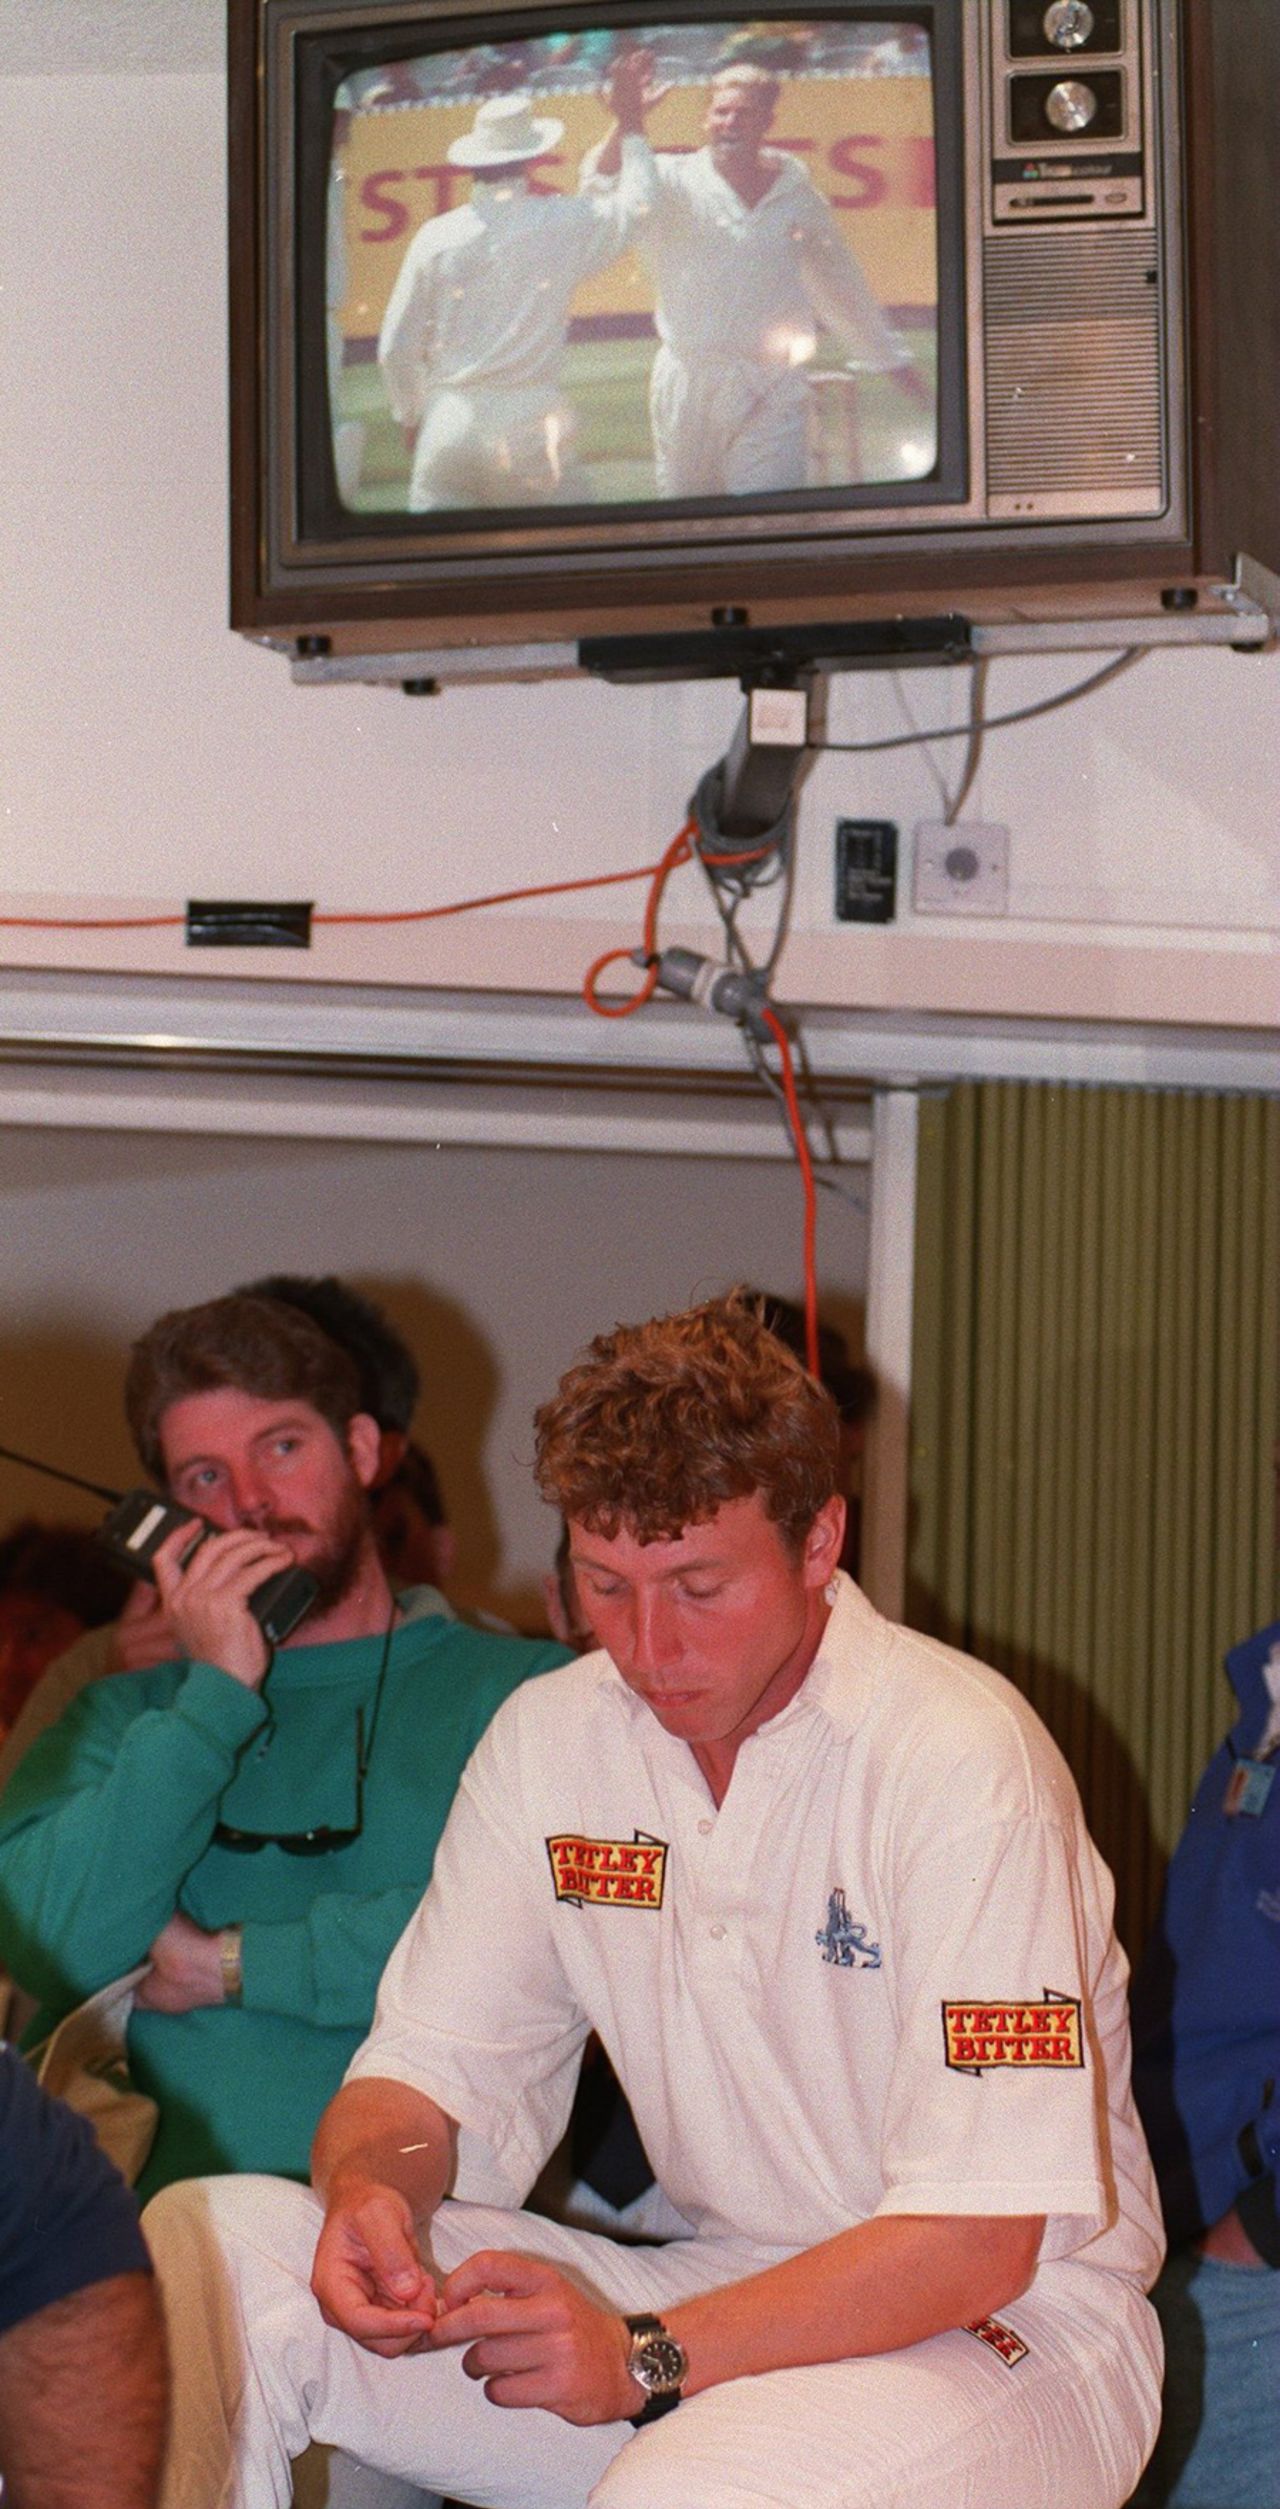 Michael Atherton sits dejected at a press conference while a TV replays Australia's victory in Melbourne, Australia v England, 2nd Test, Melbourne, 5th day, December 29, 1994